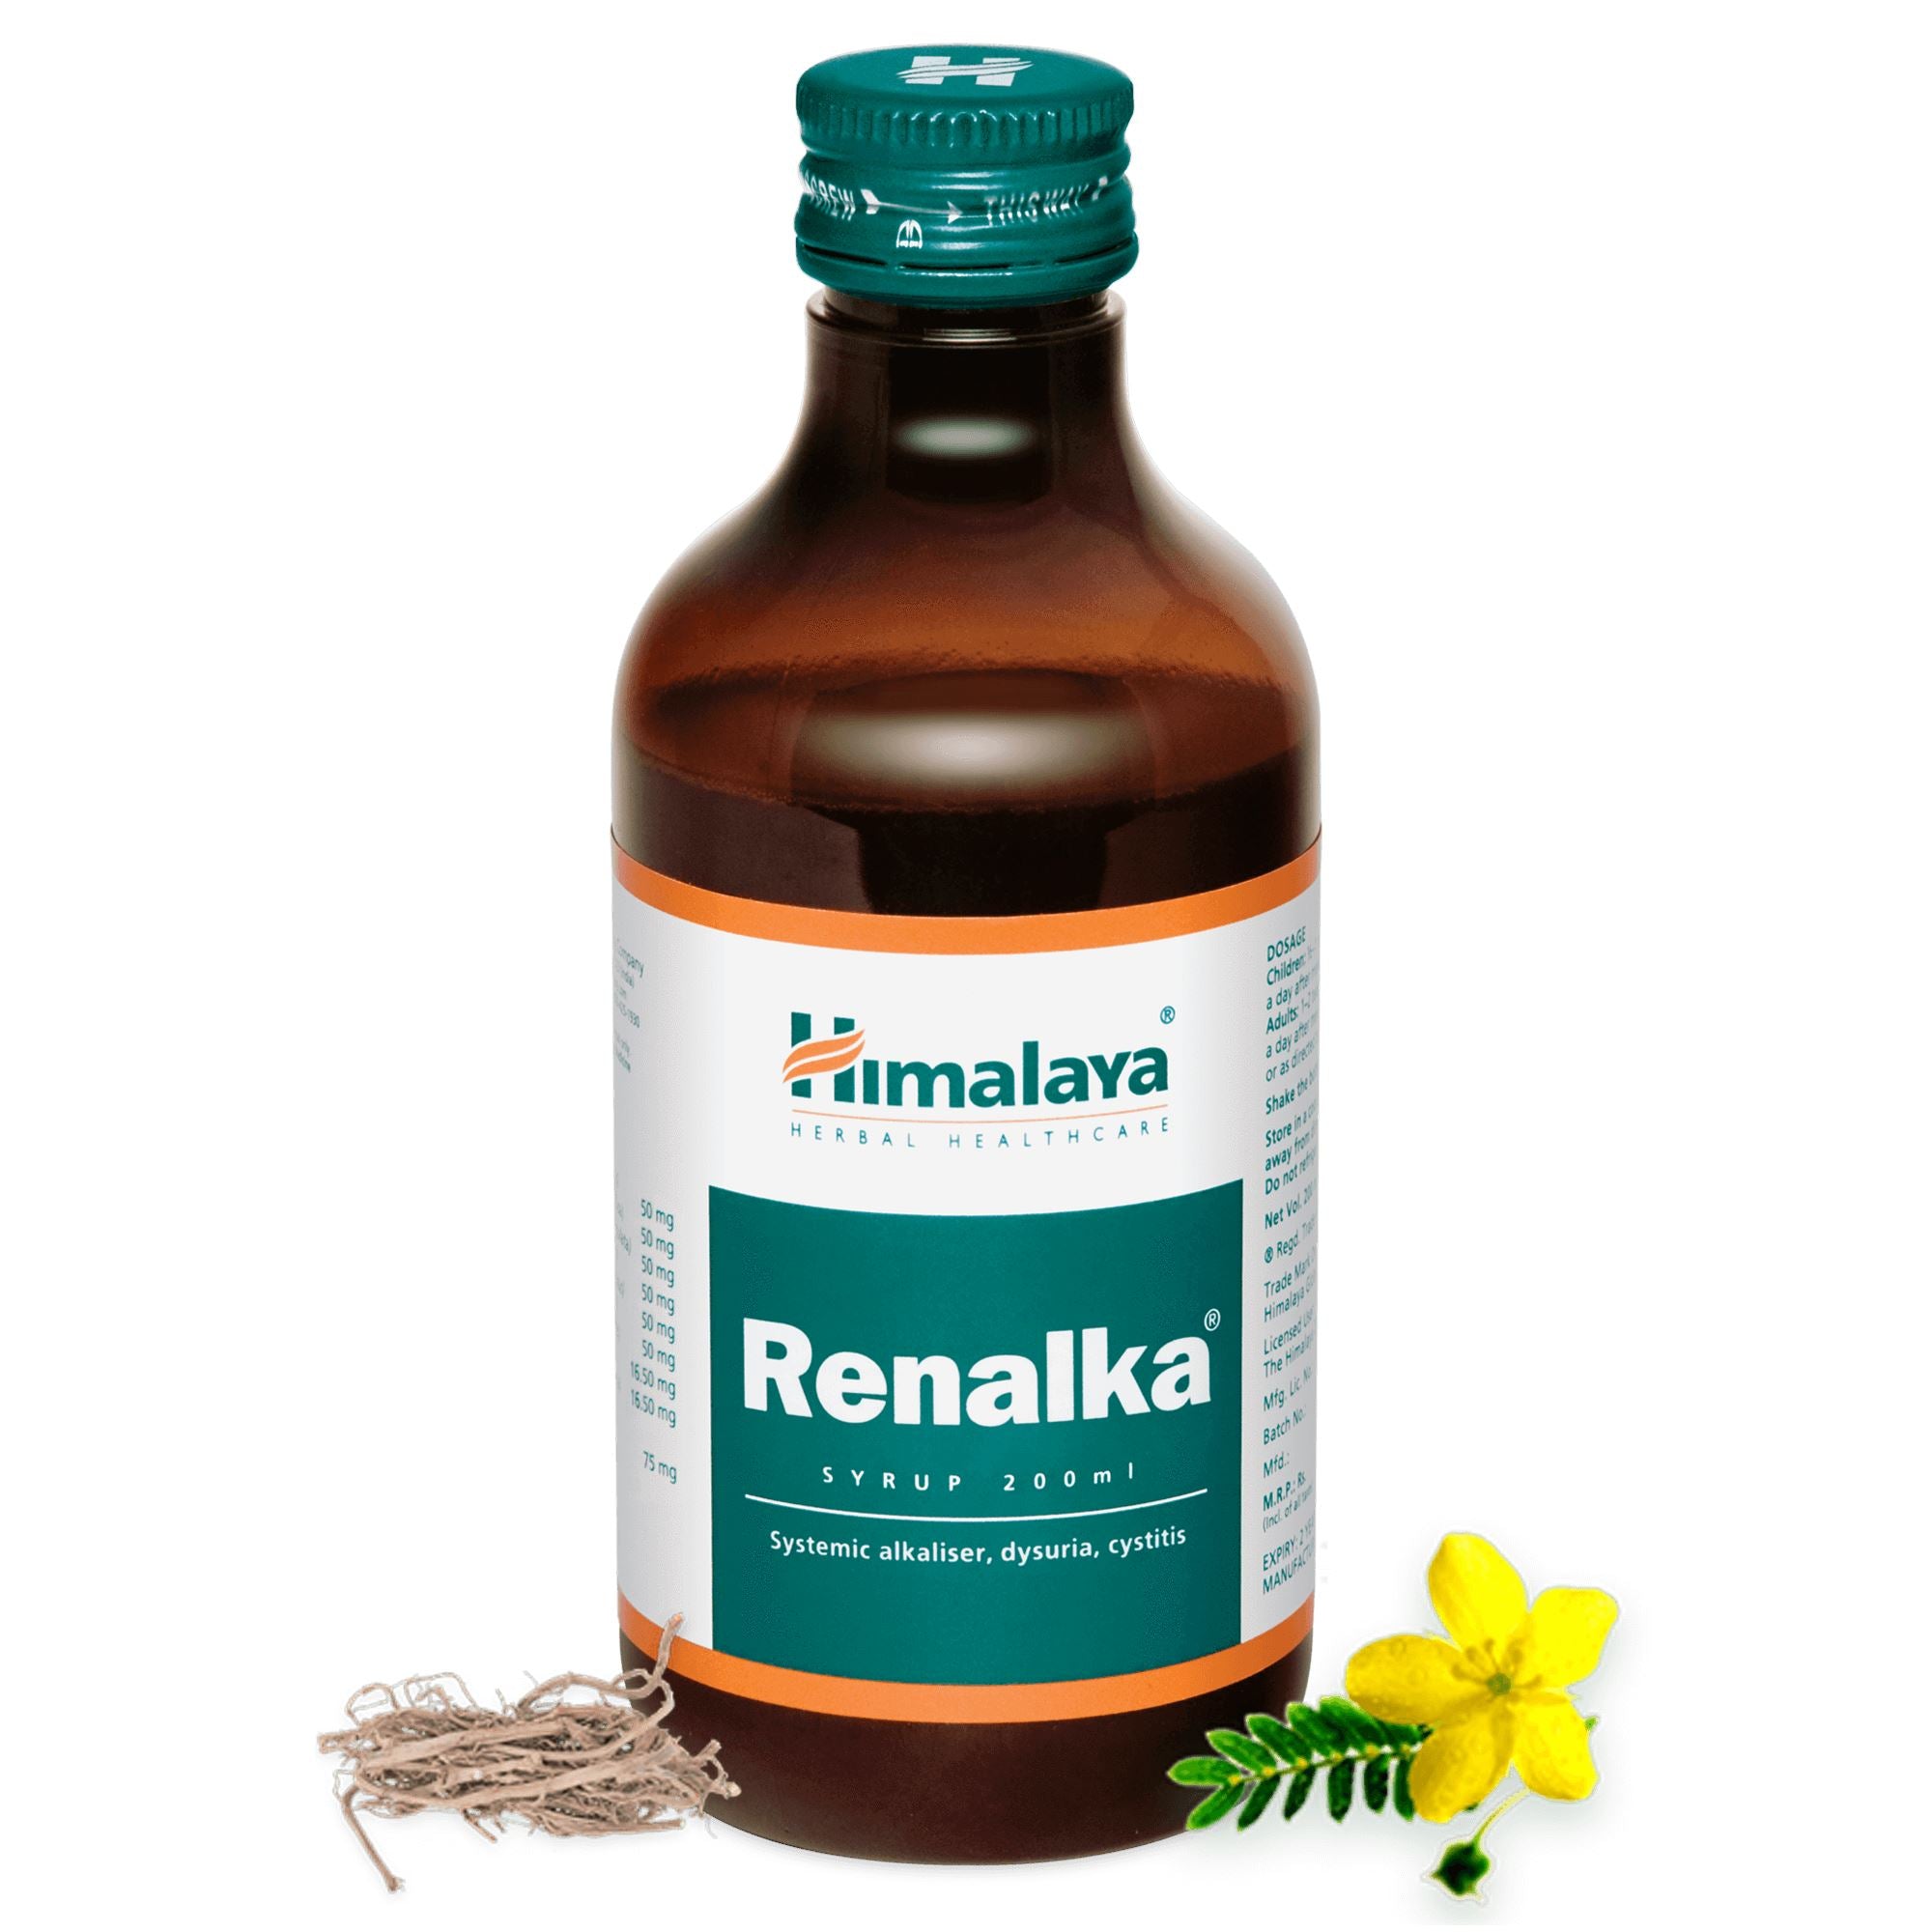 Himalaya Renalka Syrup - Relieves painful/burning urination